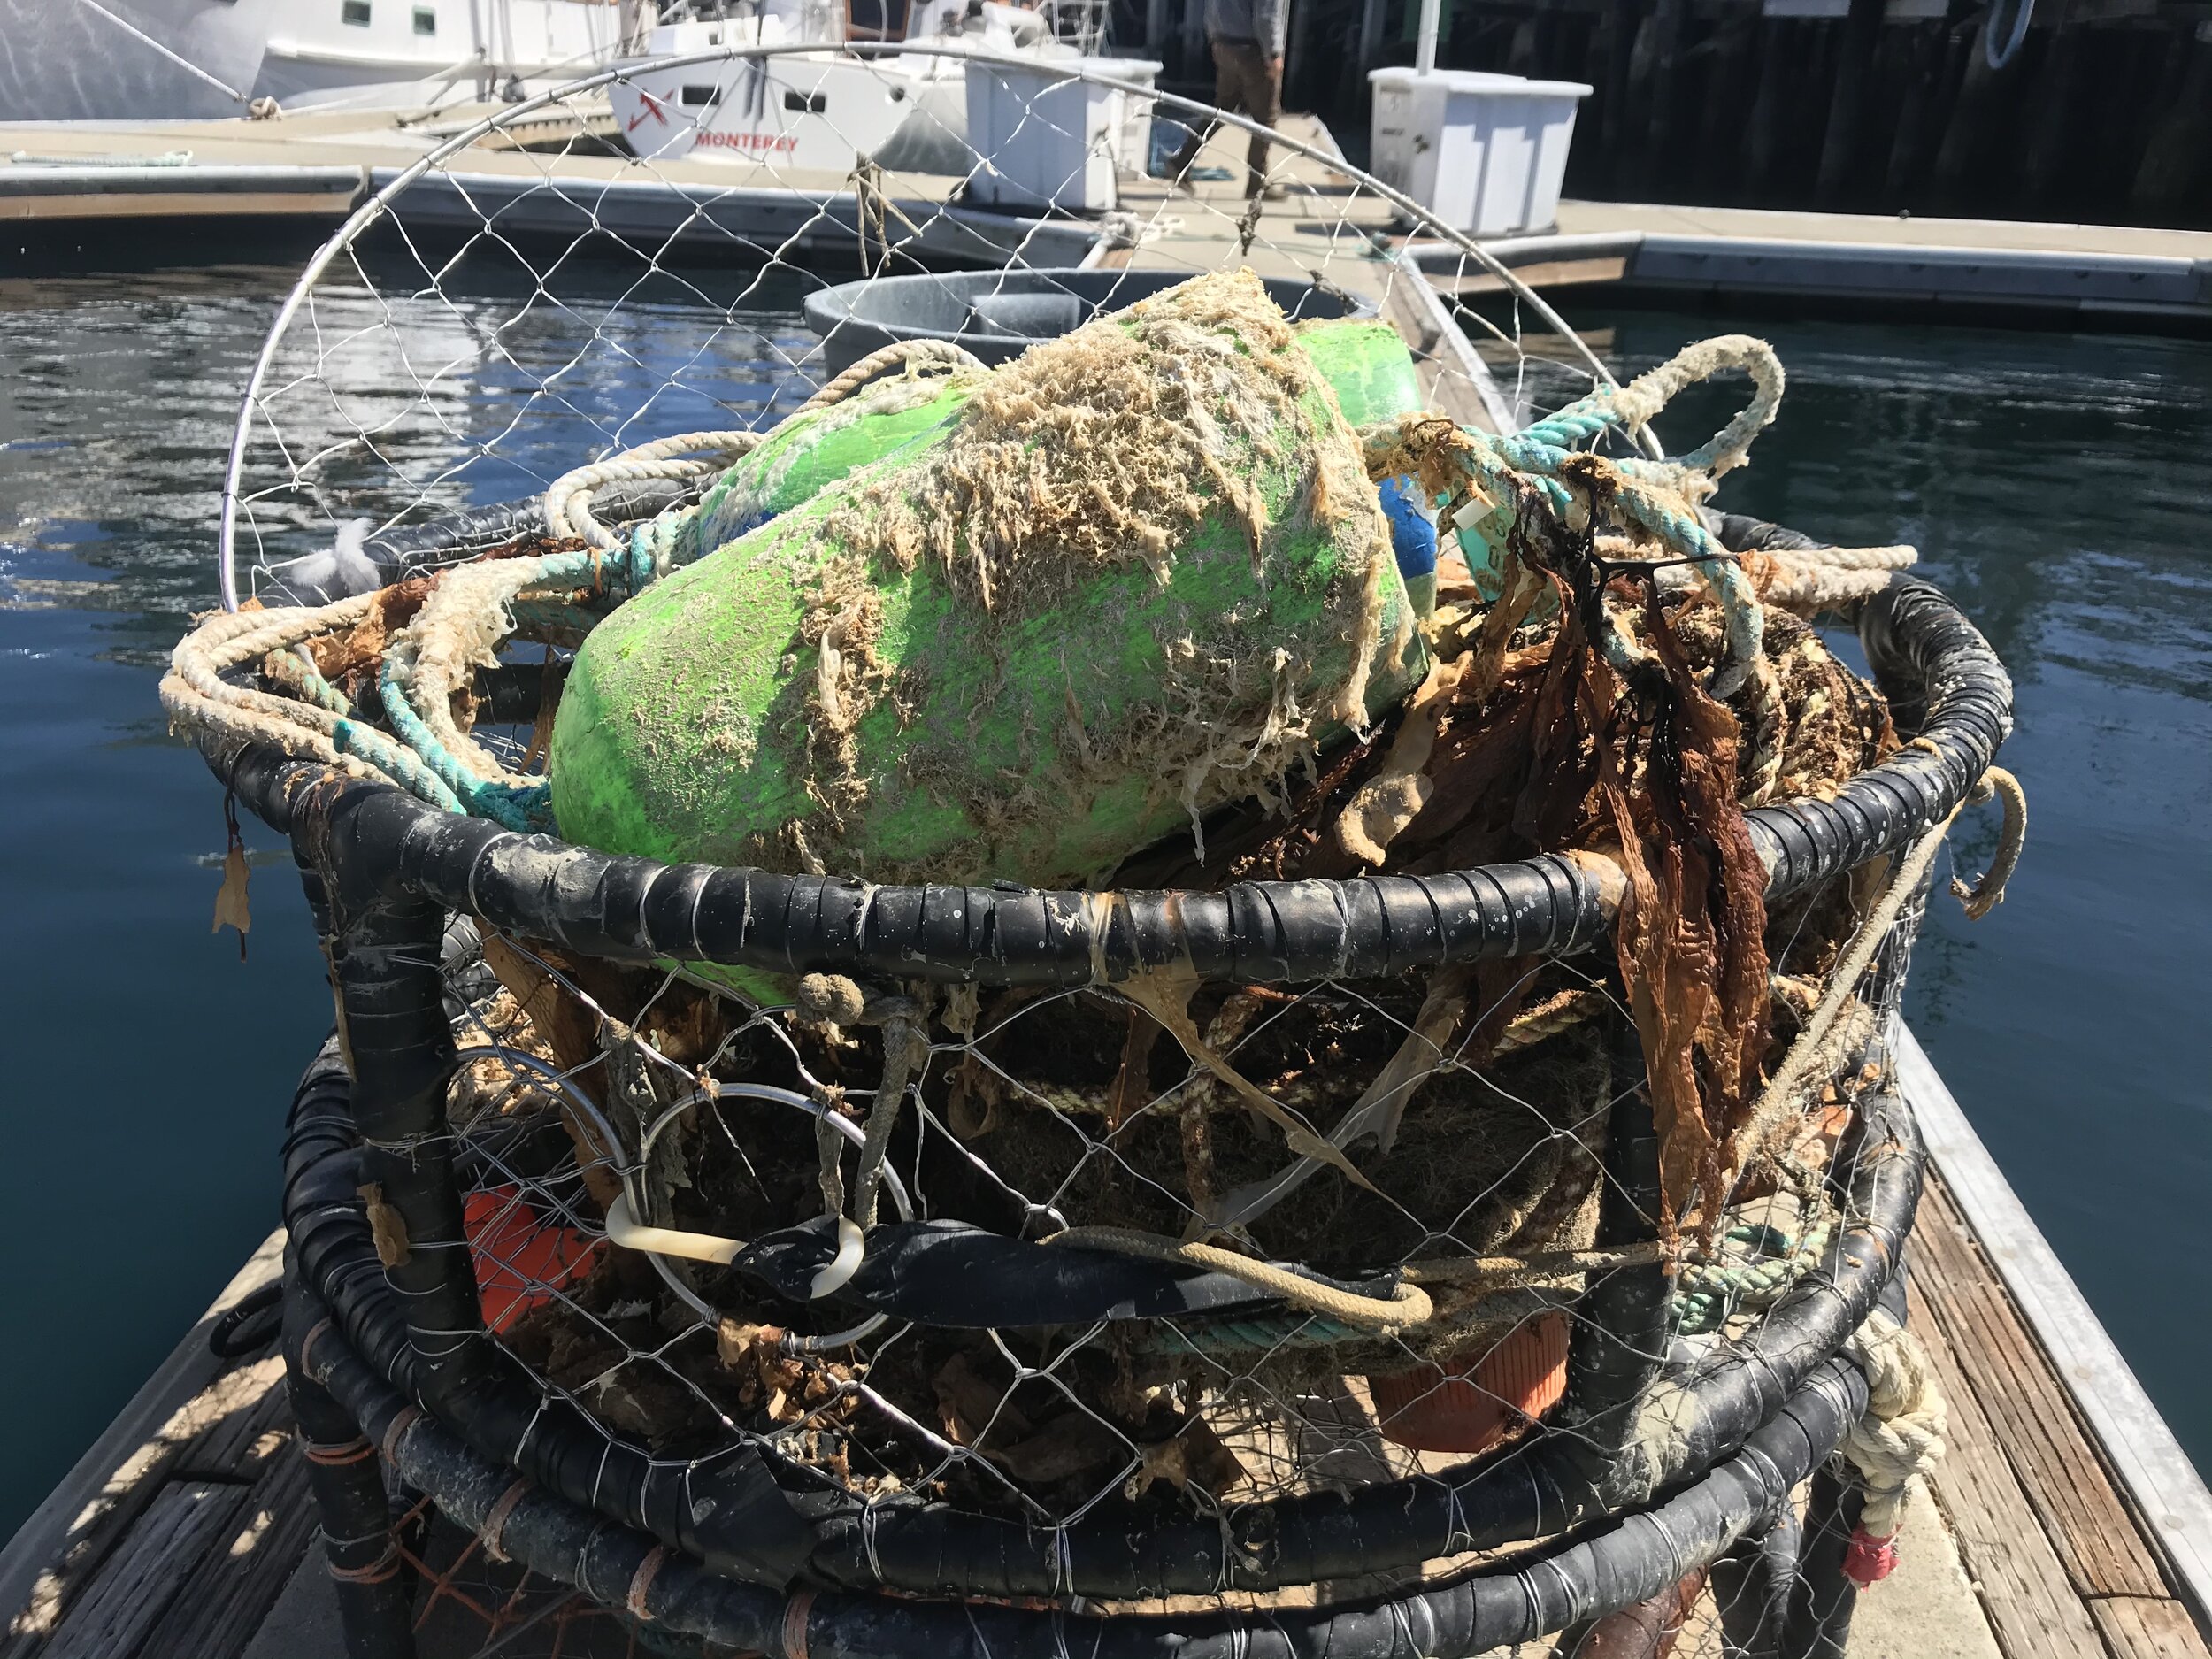 Monterey Bay Fishermen Take Action by Cleaning Up Lost Fishing